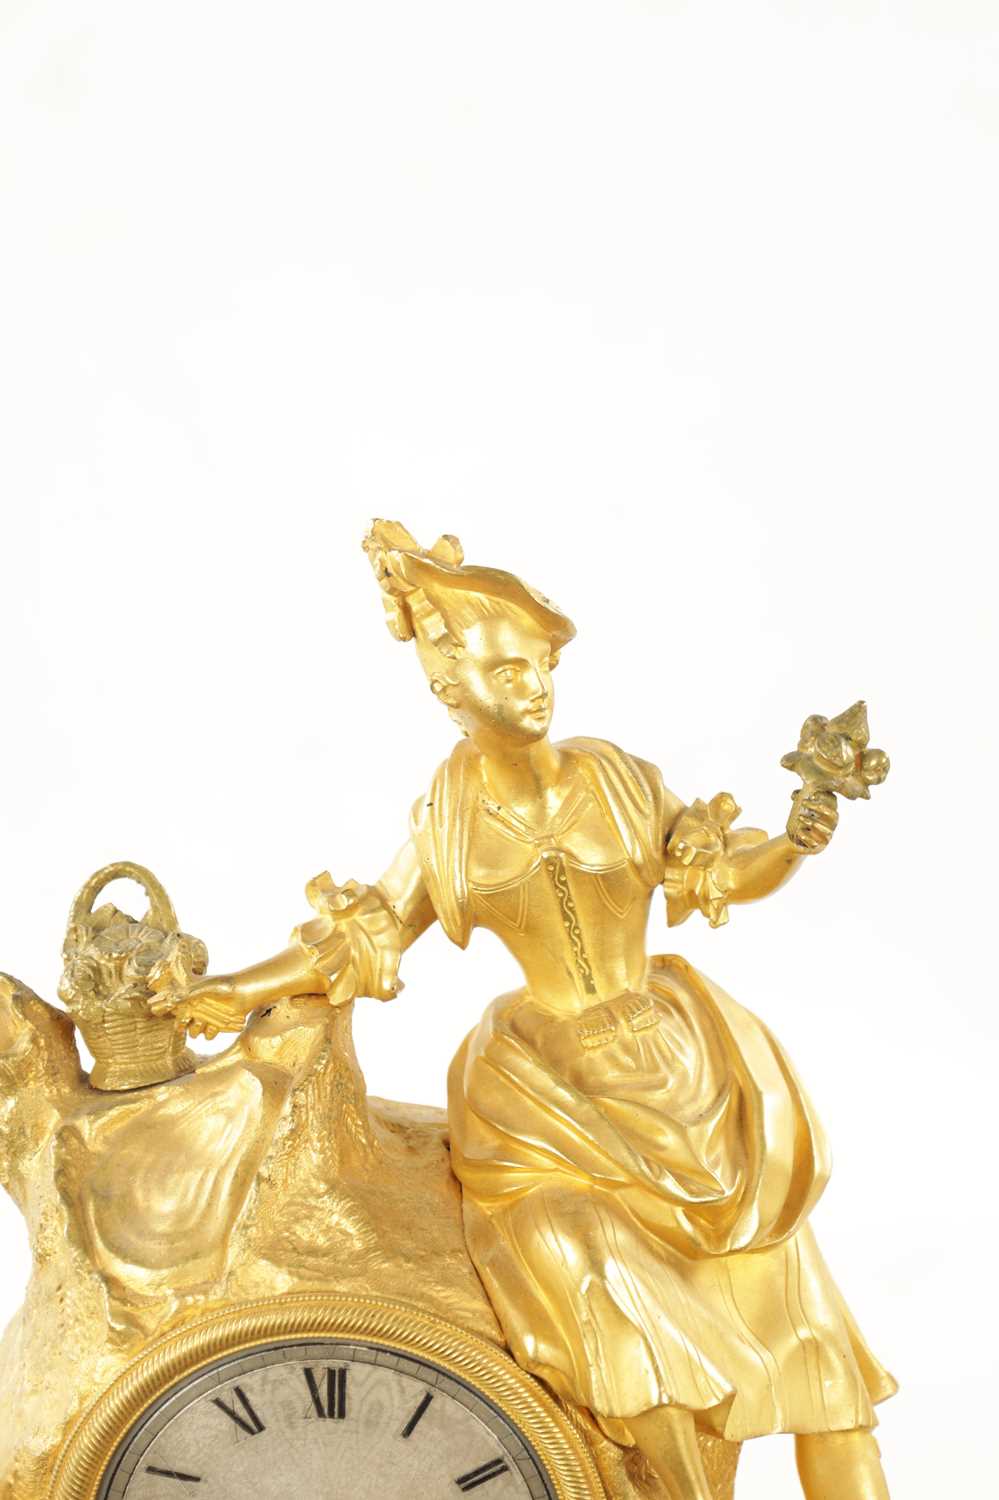 A MID 19TH CENTURY FRENCH ORMOLU FIGURAL MANTEL CLOCK - Image 3 of 9